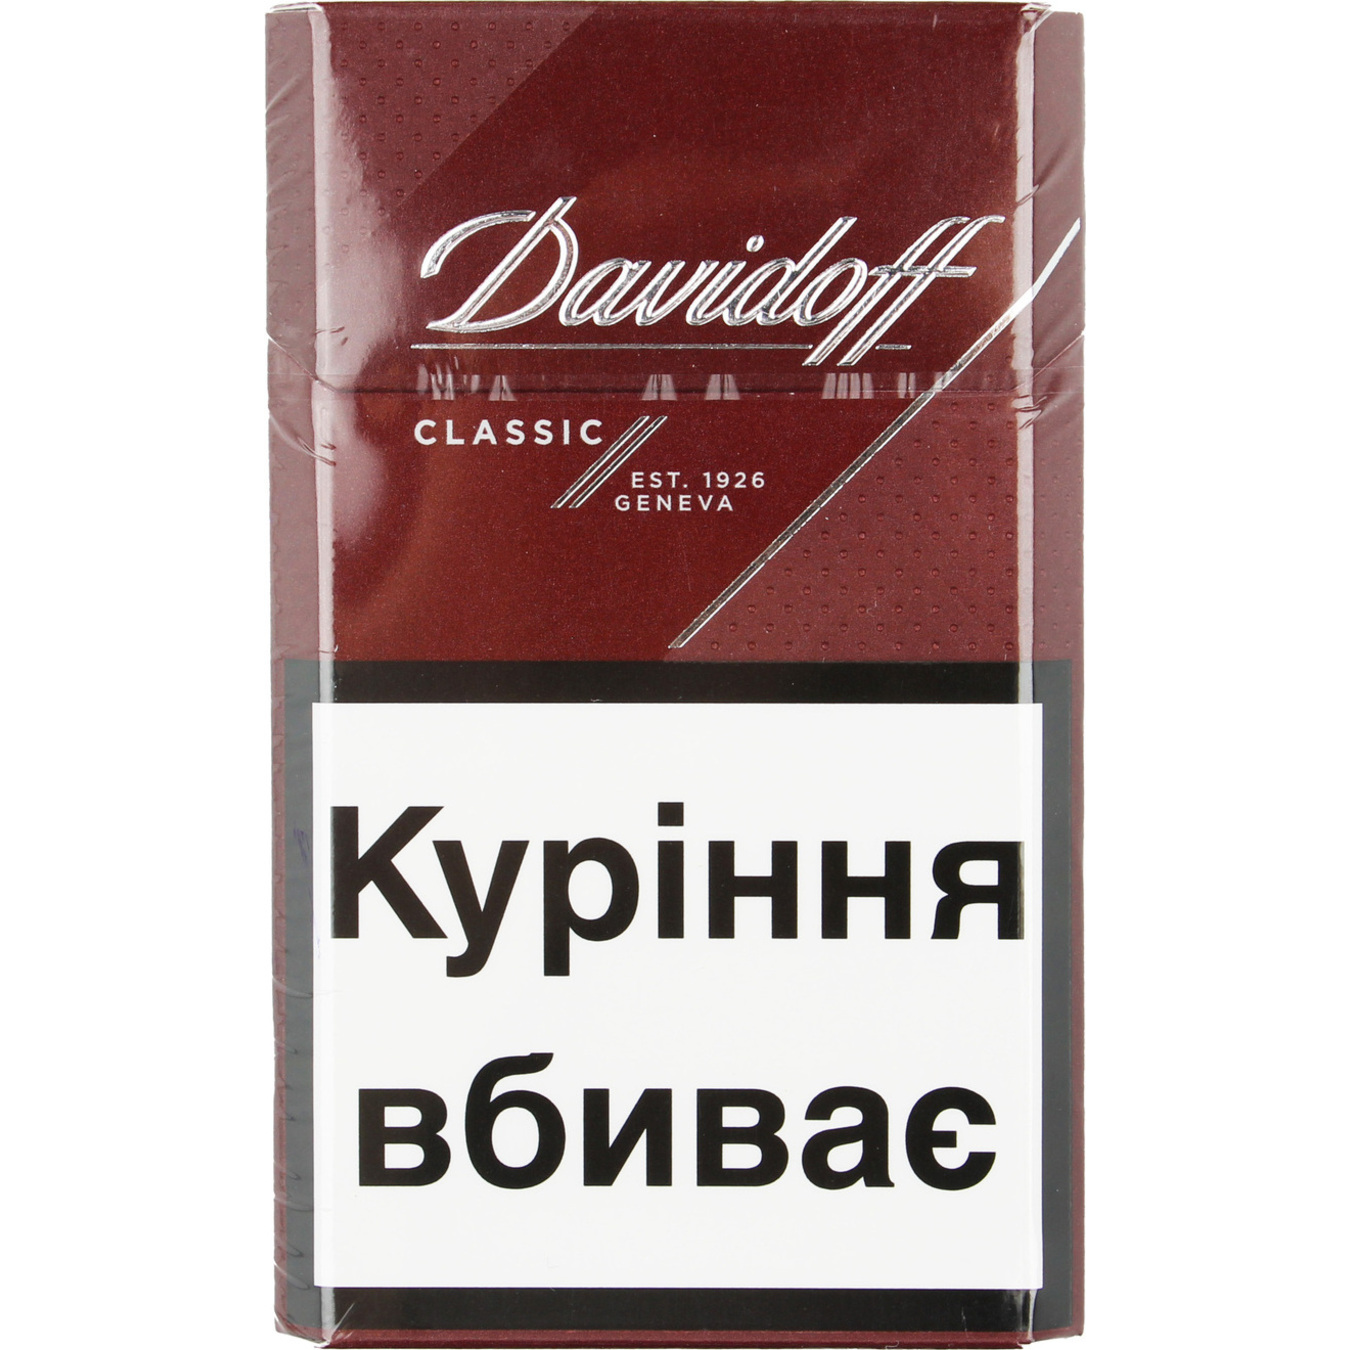 Davidoff Classic Cigarettes 20 pcs (the price is indicated without excise tax)